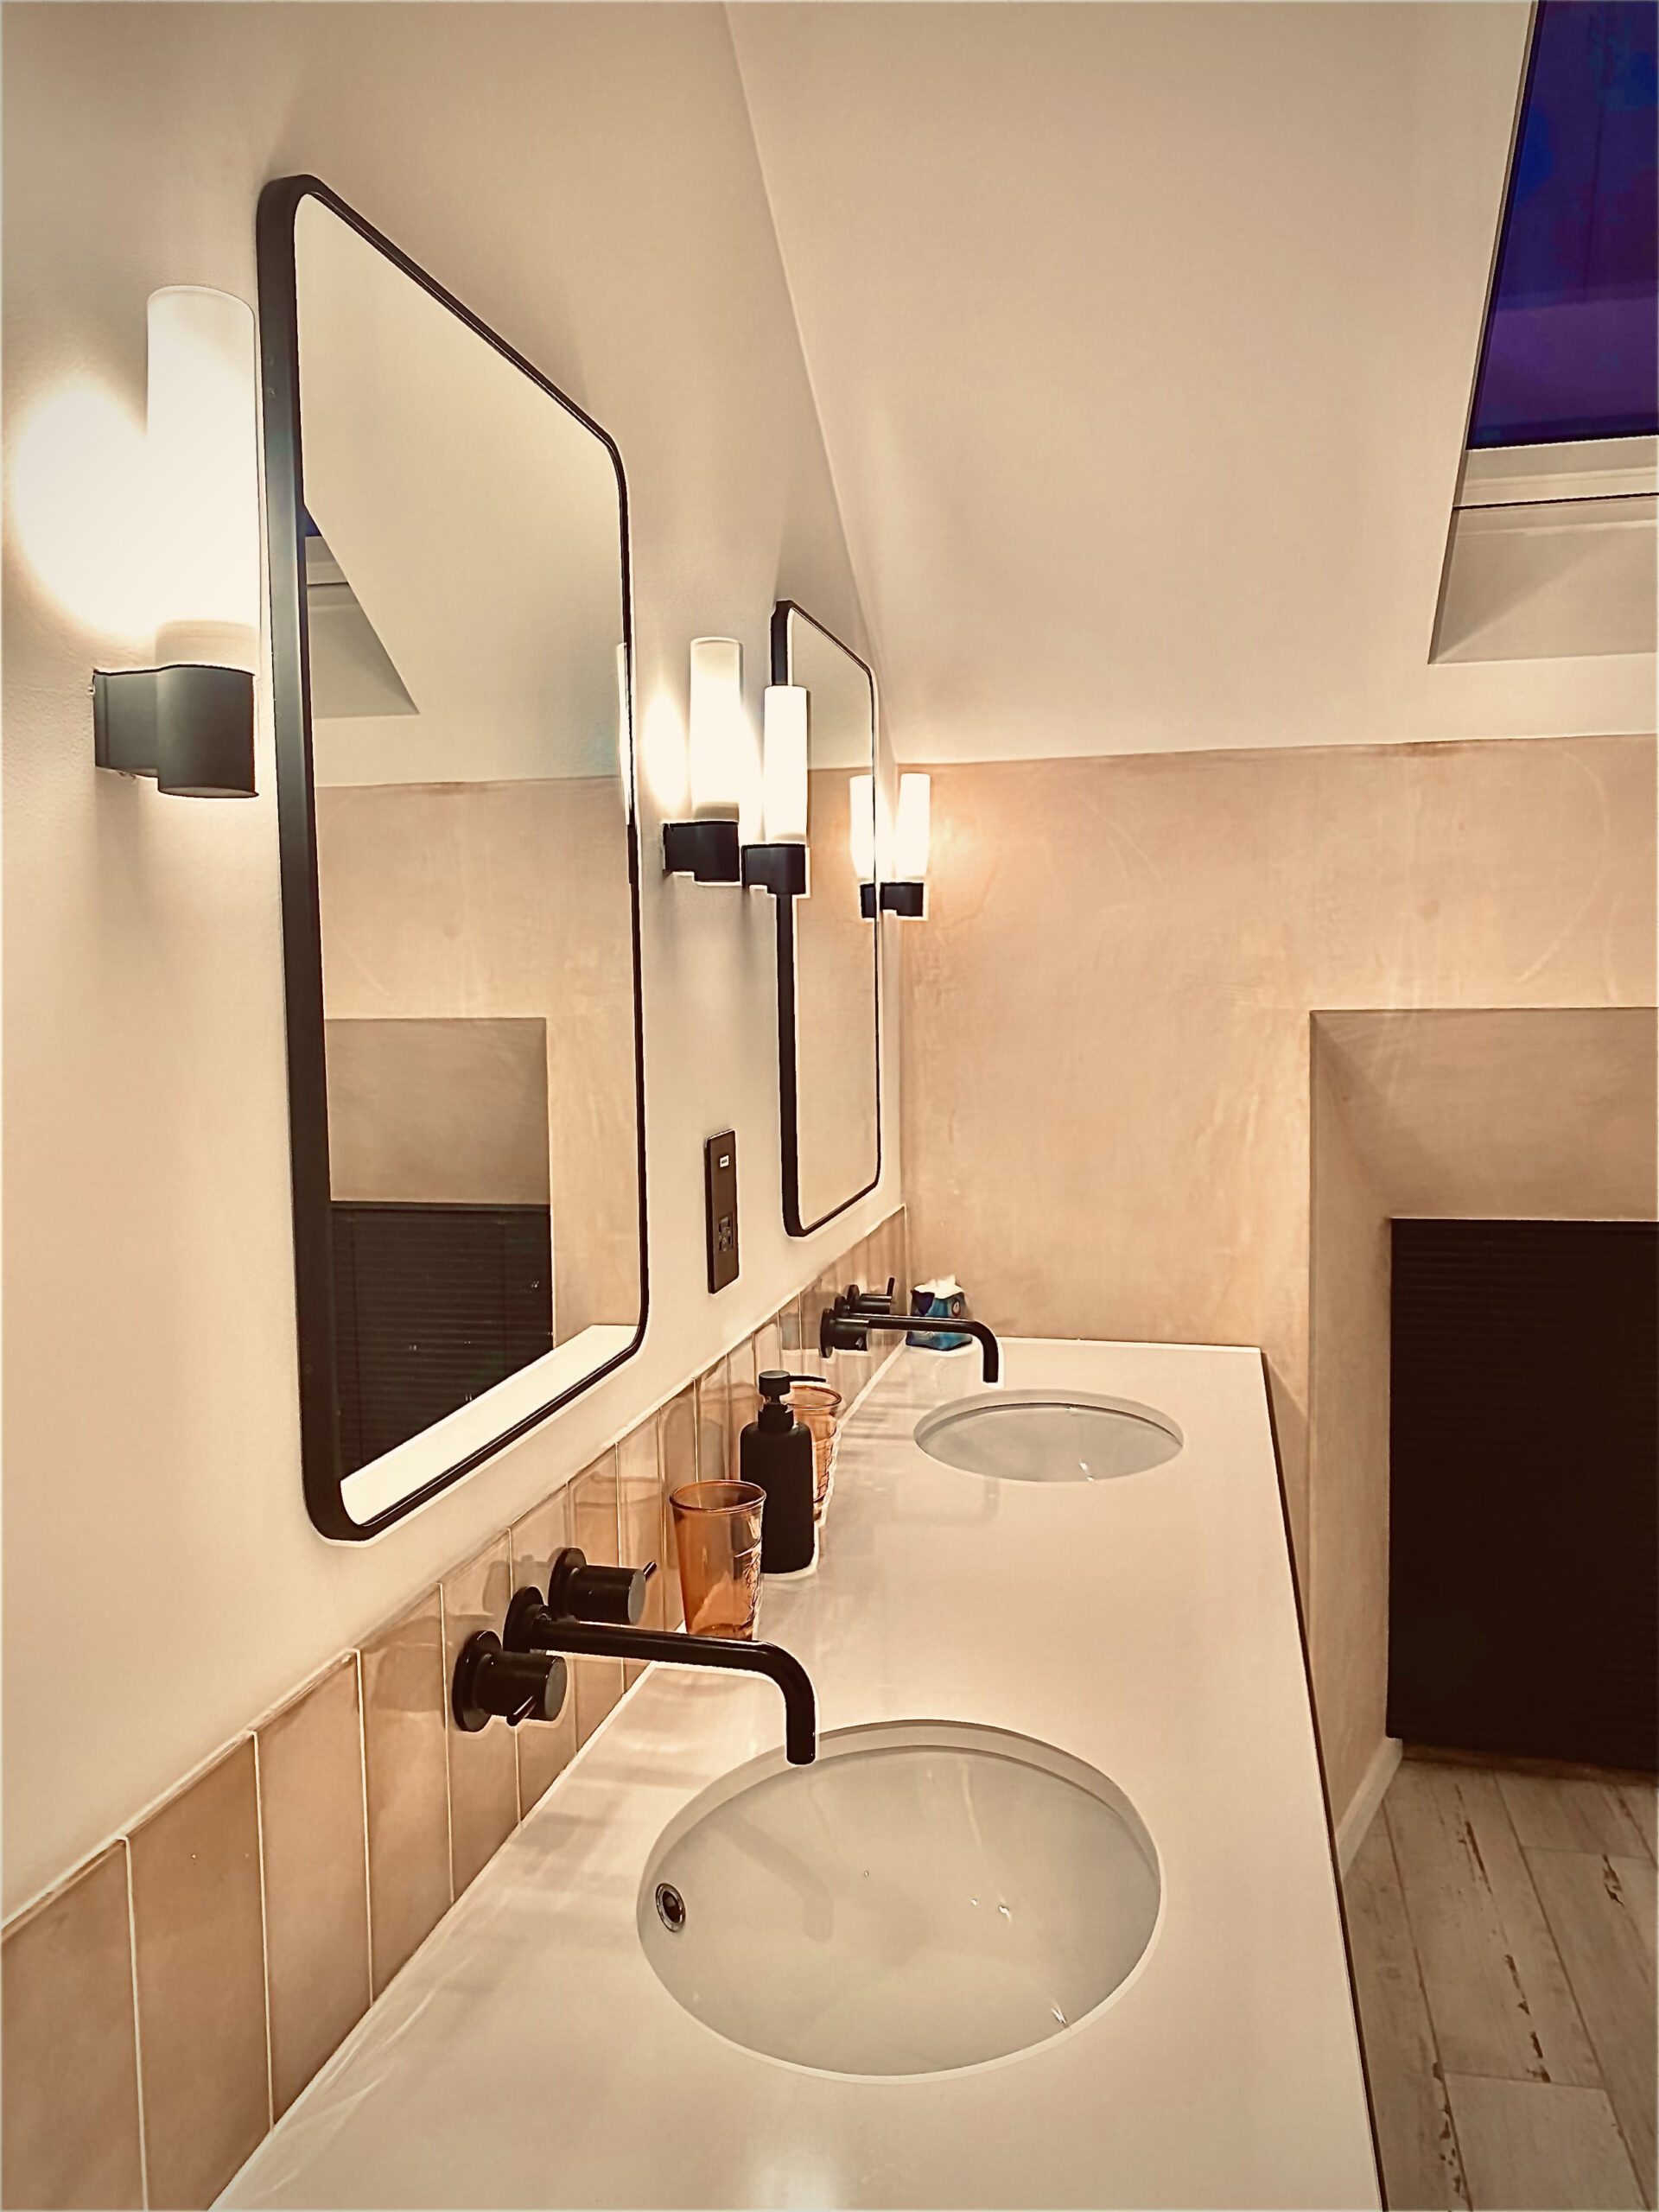 5 tips for lighting a bathroom. A photo of vanity basins with mirrors in a domestic bathroom, specialist lighting designer